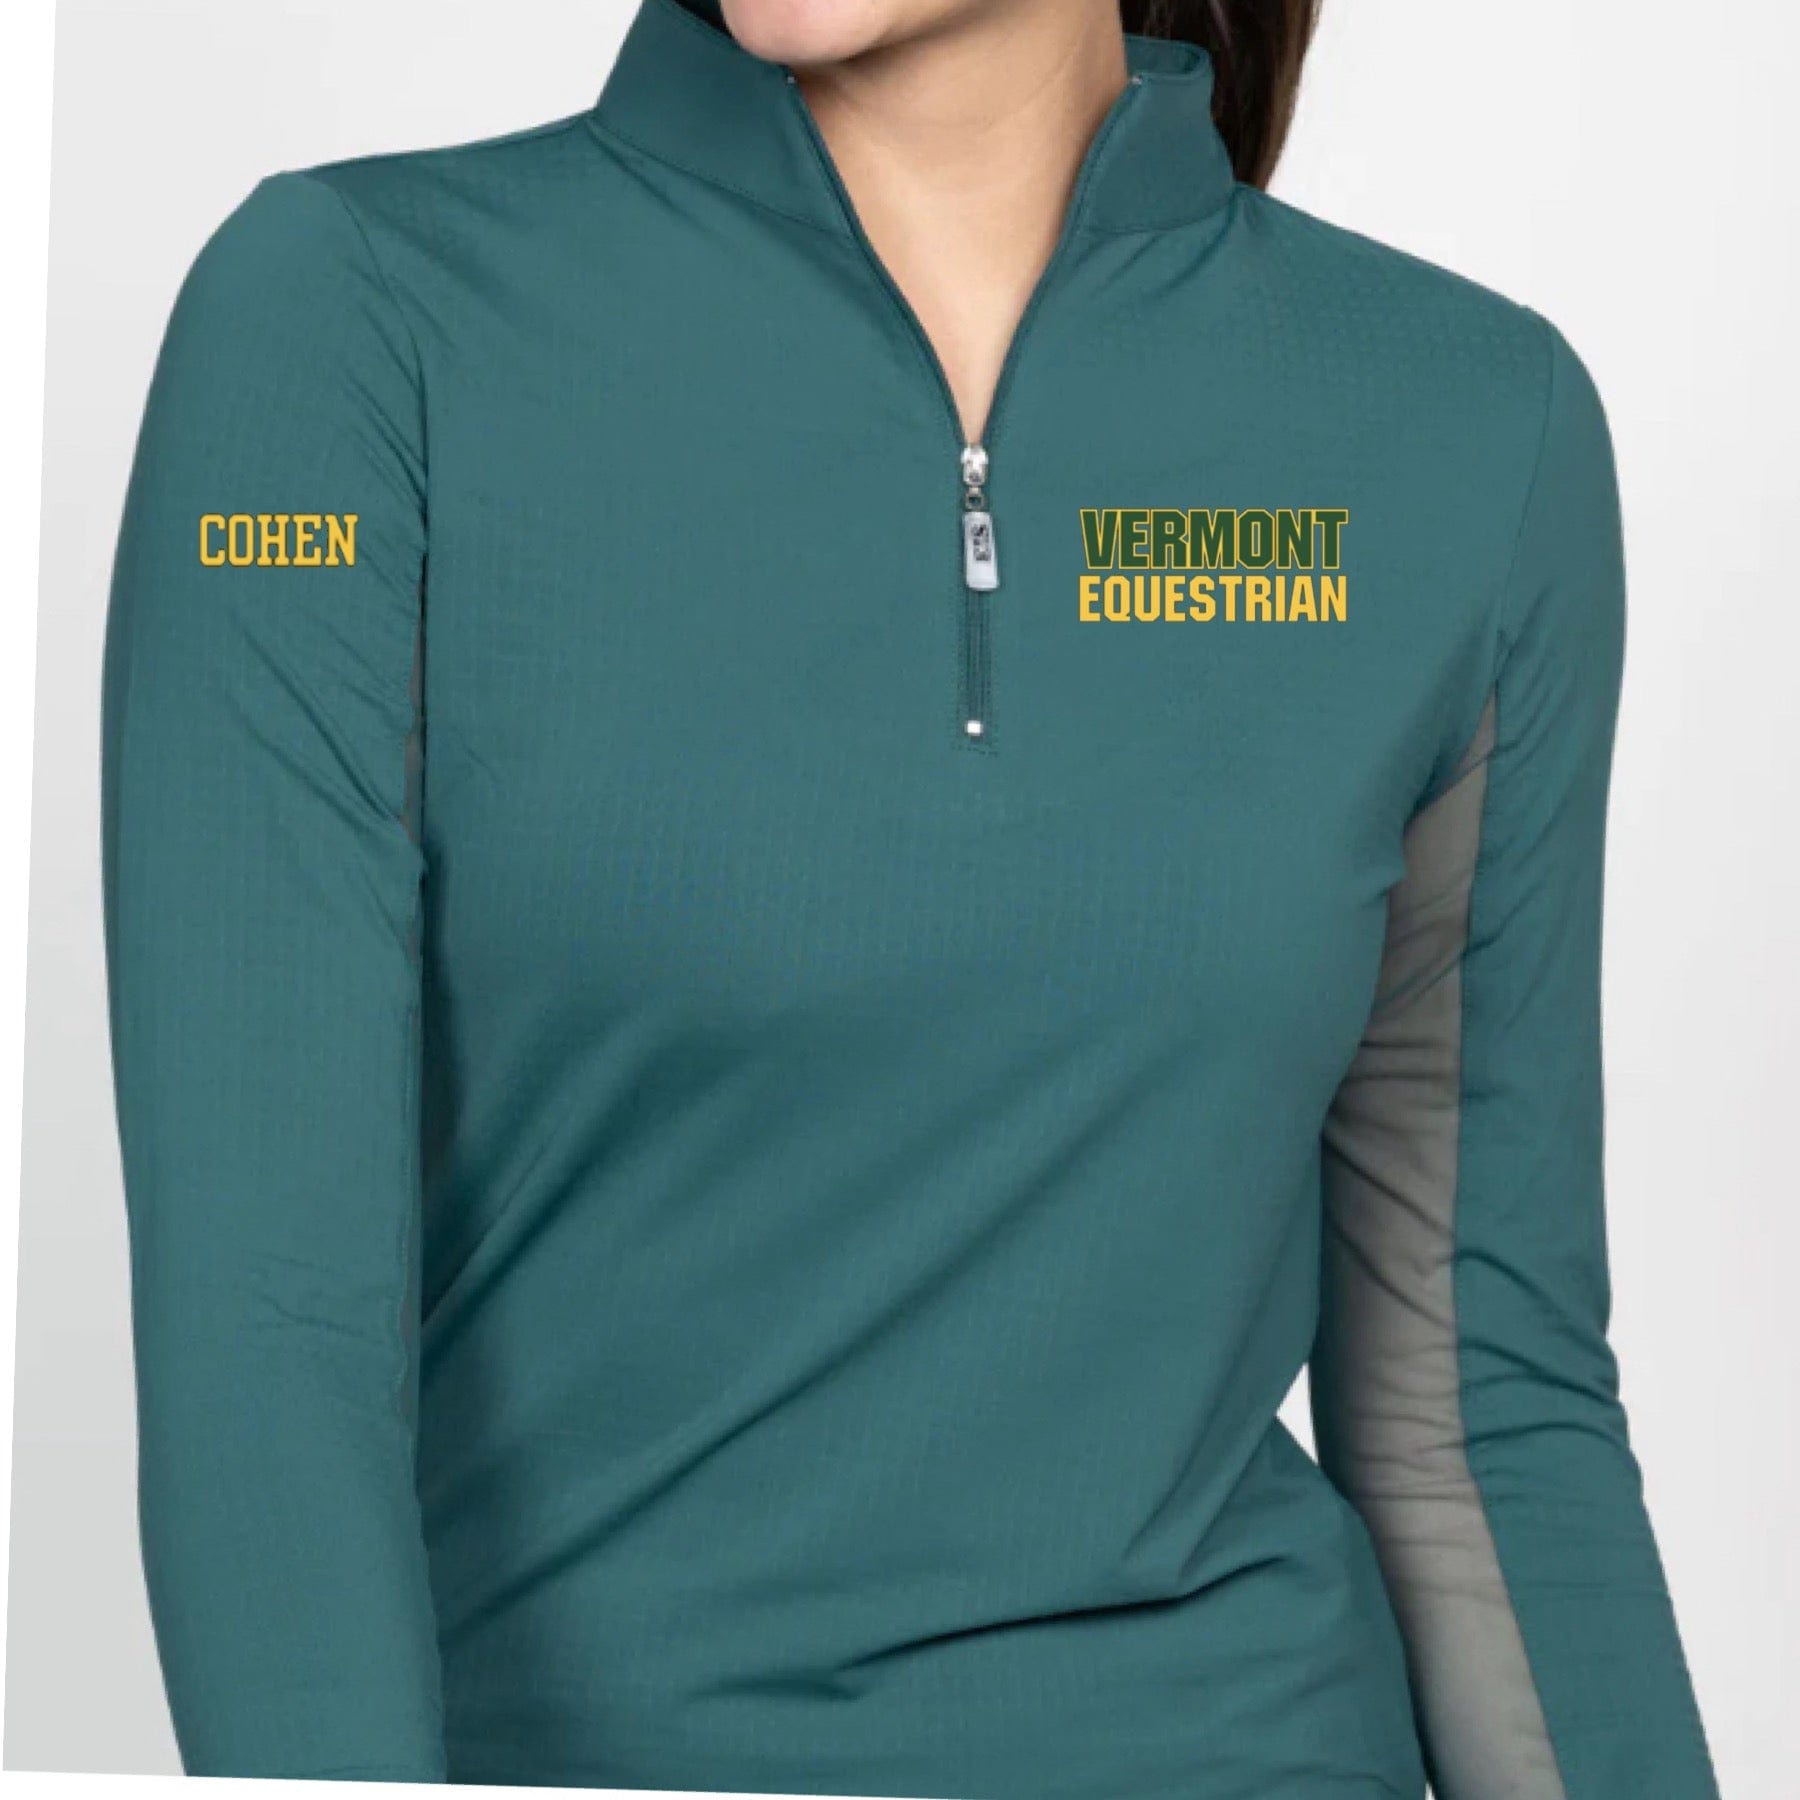 Equestrian Team Apparel Vermont Equestrian Sun Shirt equestrian team apparel online tack store mobile tack store custom farm apparel custom show stable clothing equestrian lifestyle horse show clothing riding clothes horses equestrian tack store